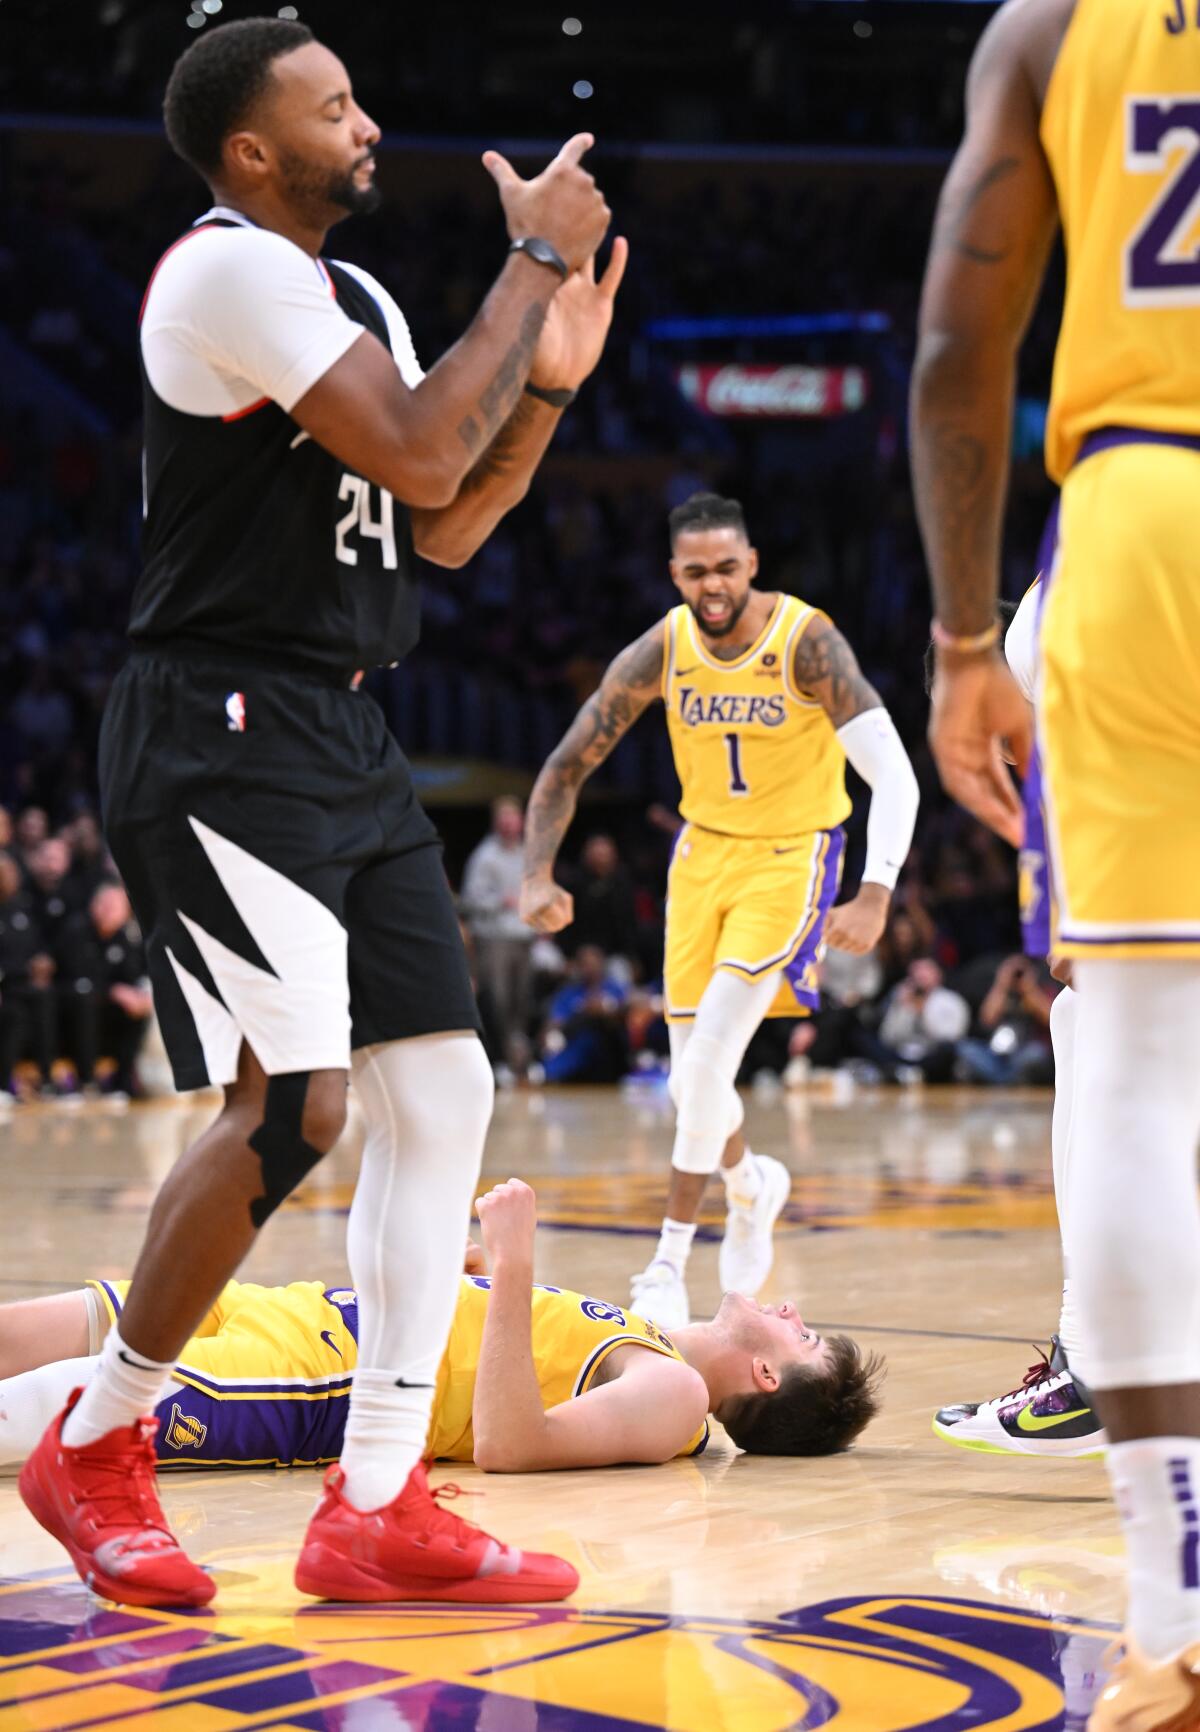 The Lakers' Austin Reaves lies on the floor while other players are nearby.